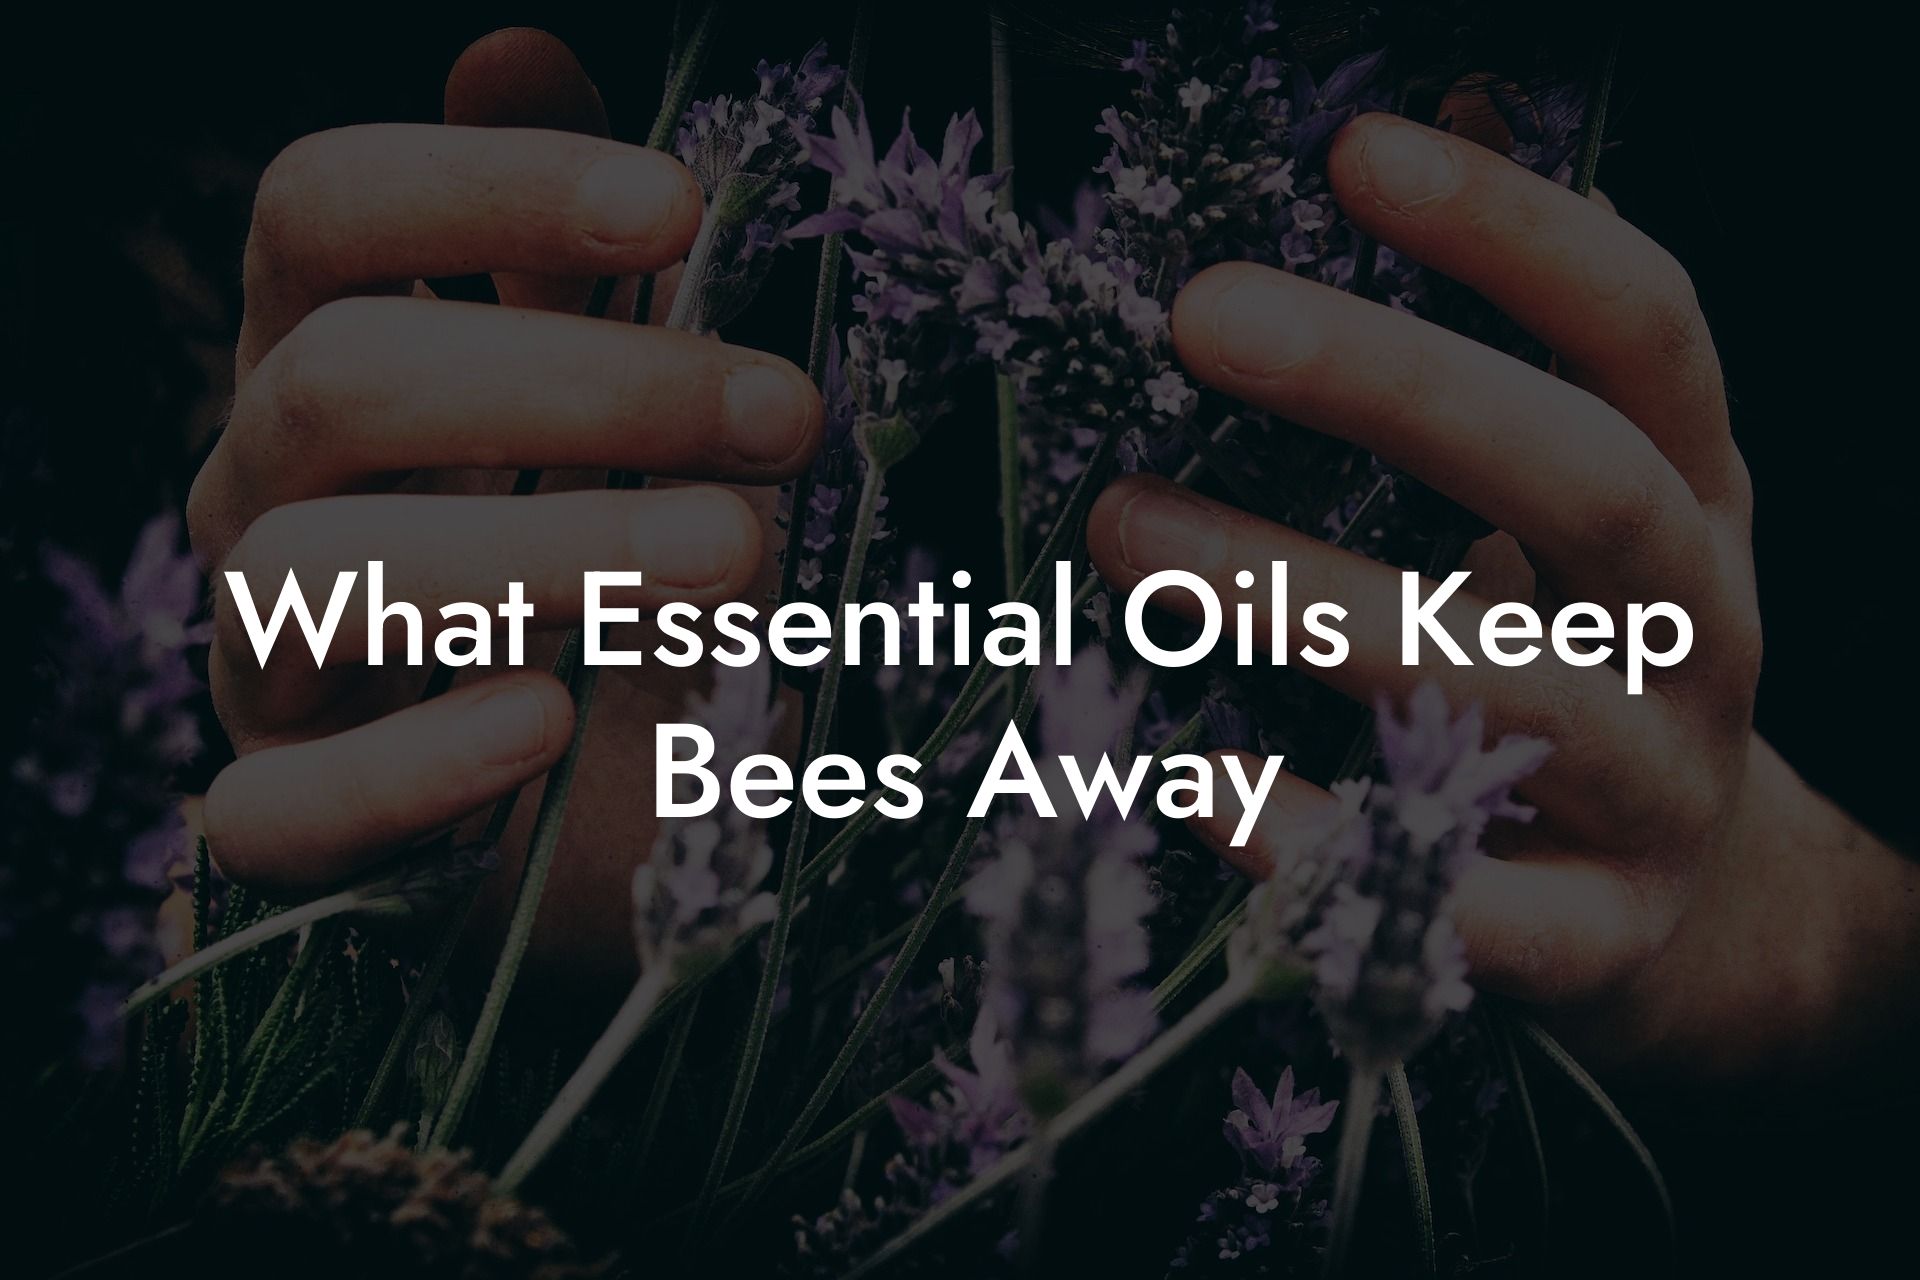 What Essential Oils Keep Bees Away